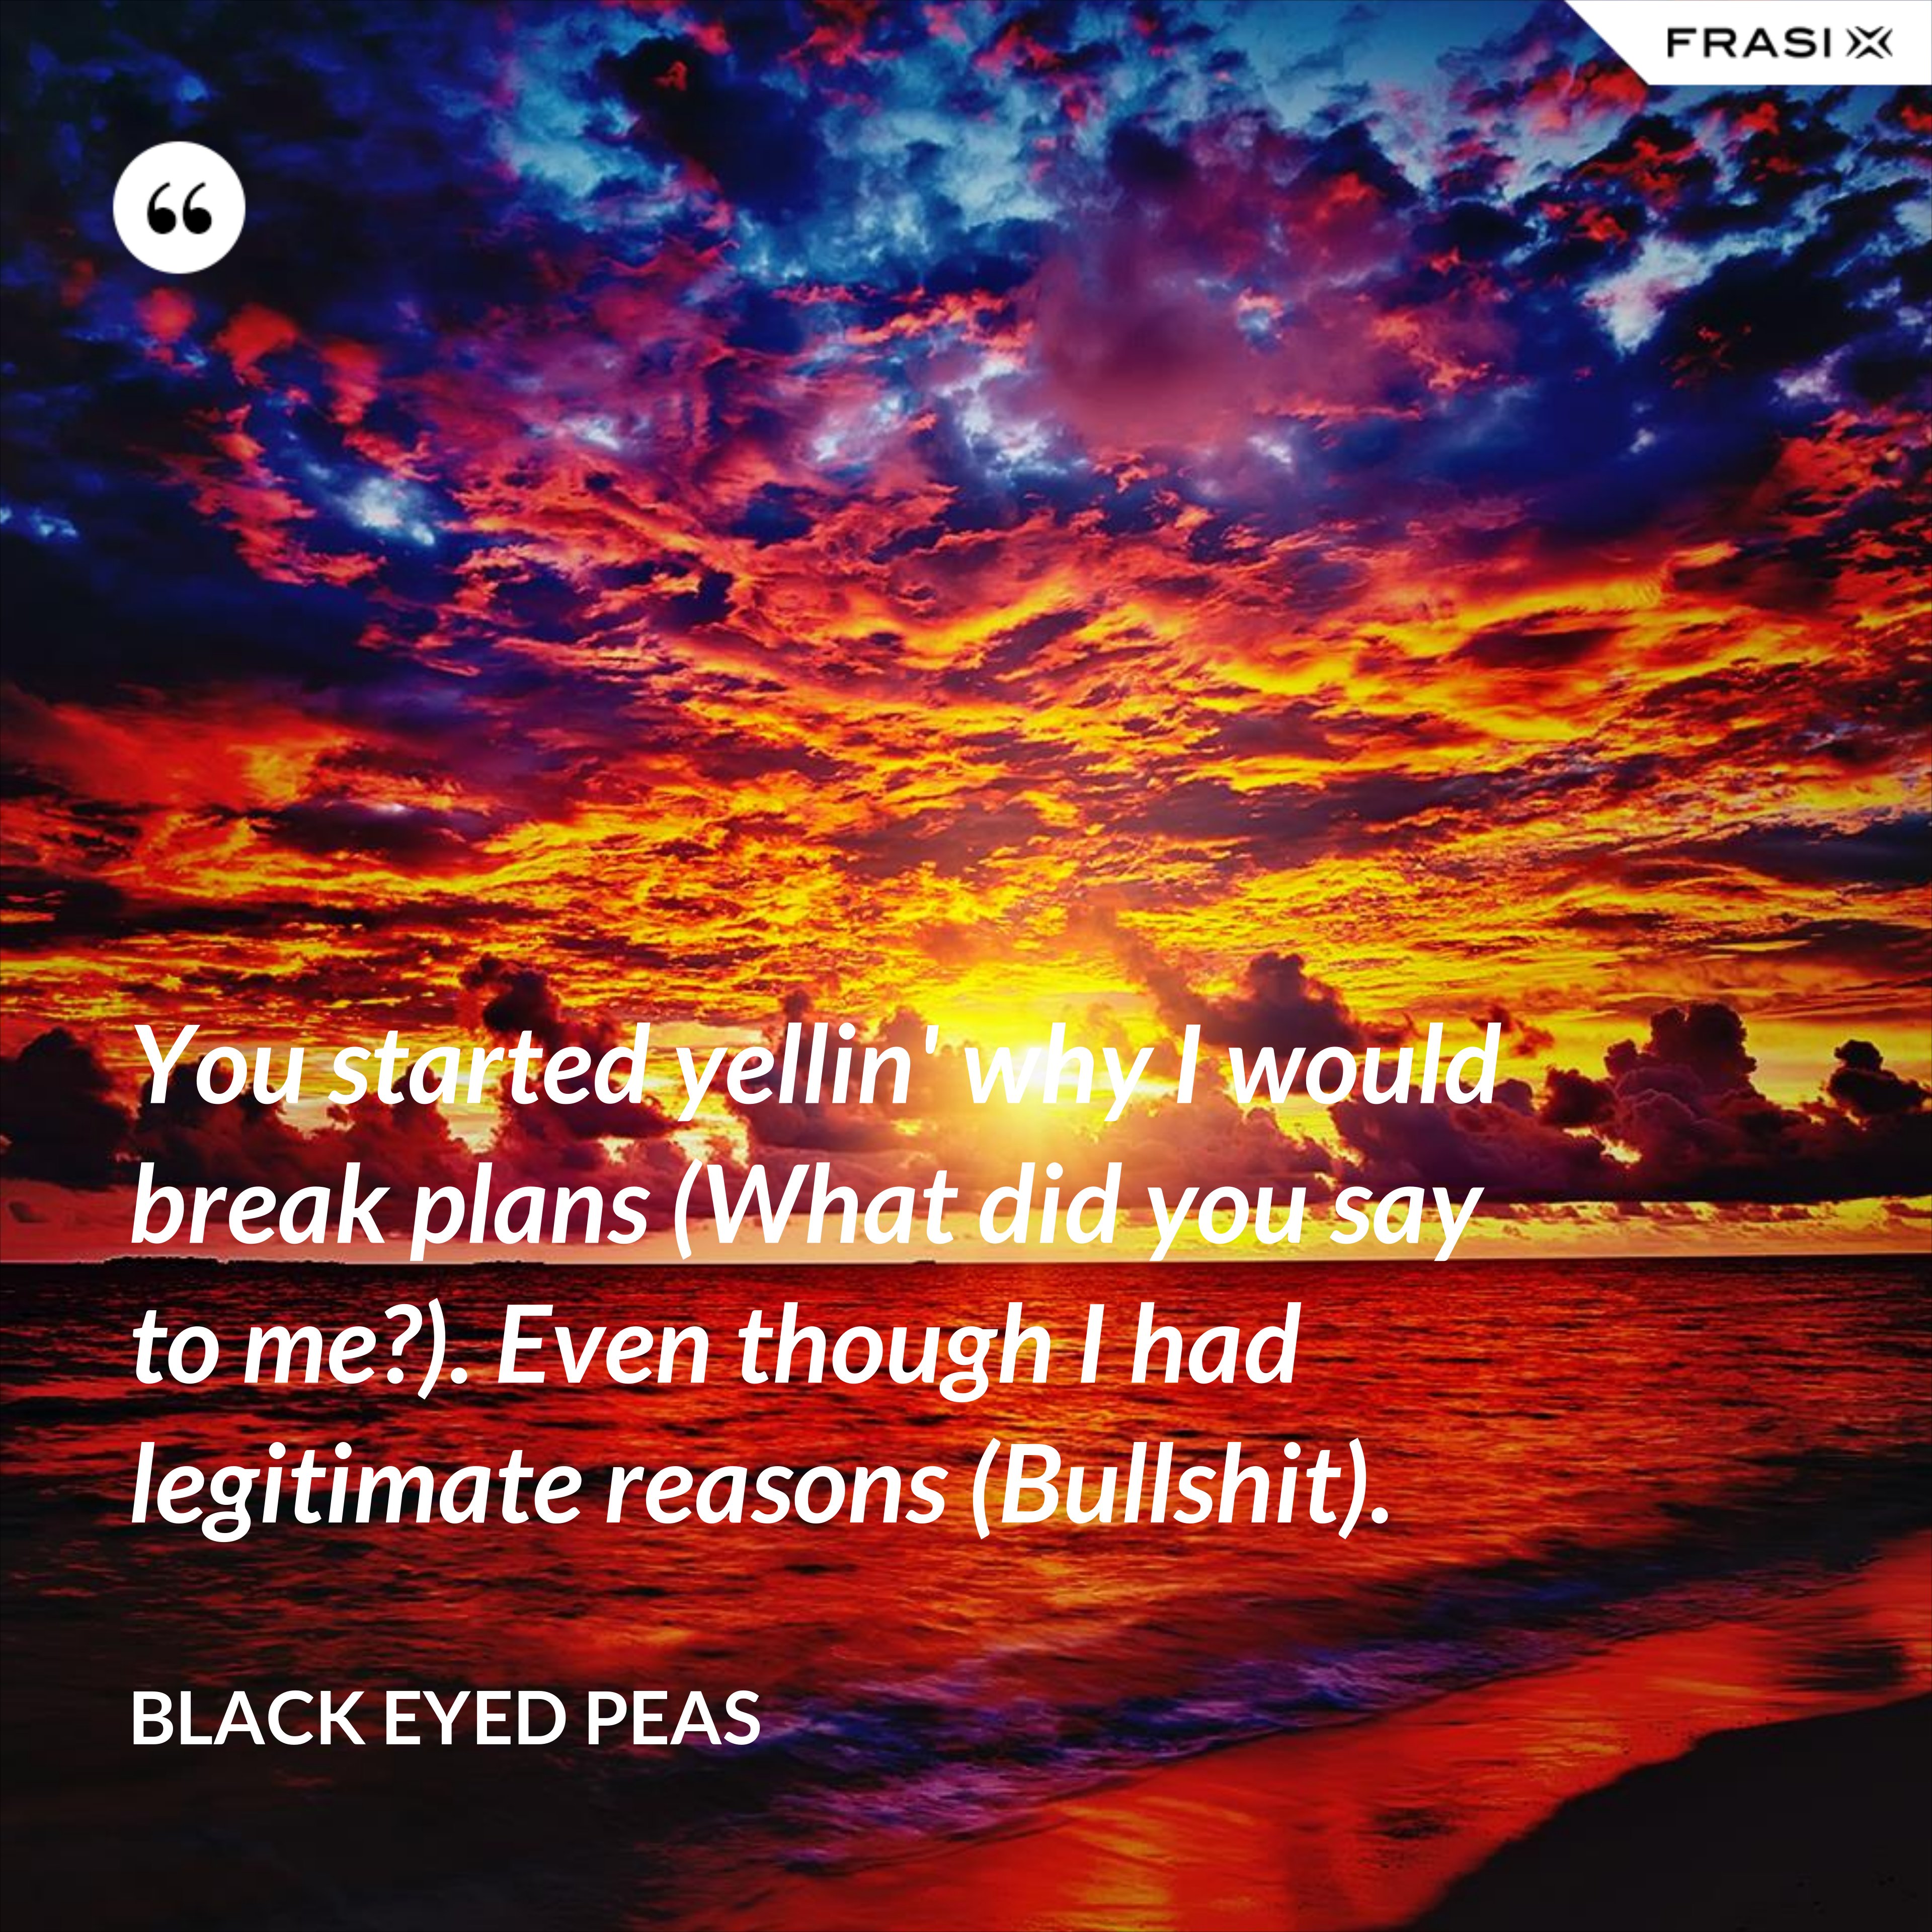 You started yellin' why I would break plans (What did you say to me?). Even though I had legitimate reasons (Bullshit). - Black Eyed Peas